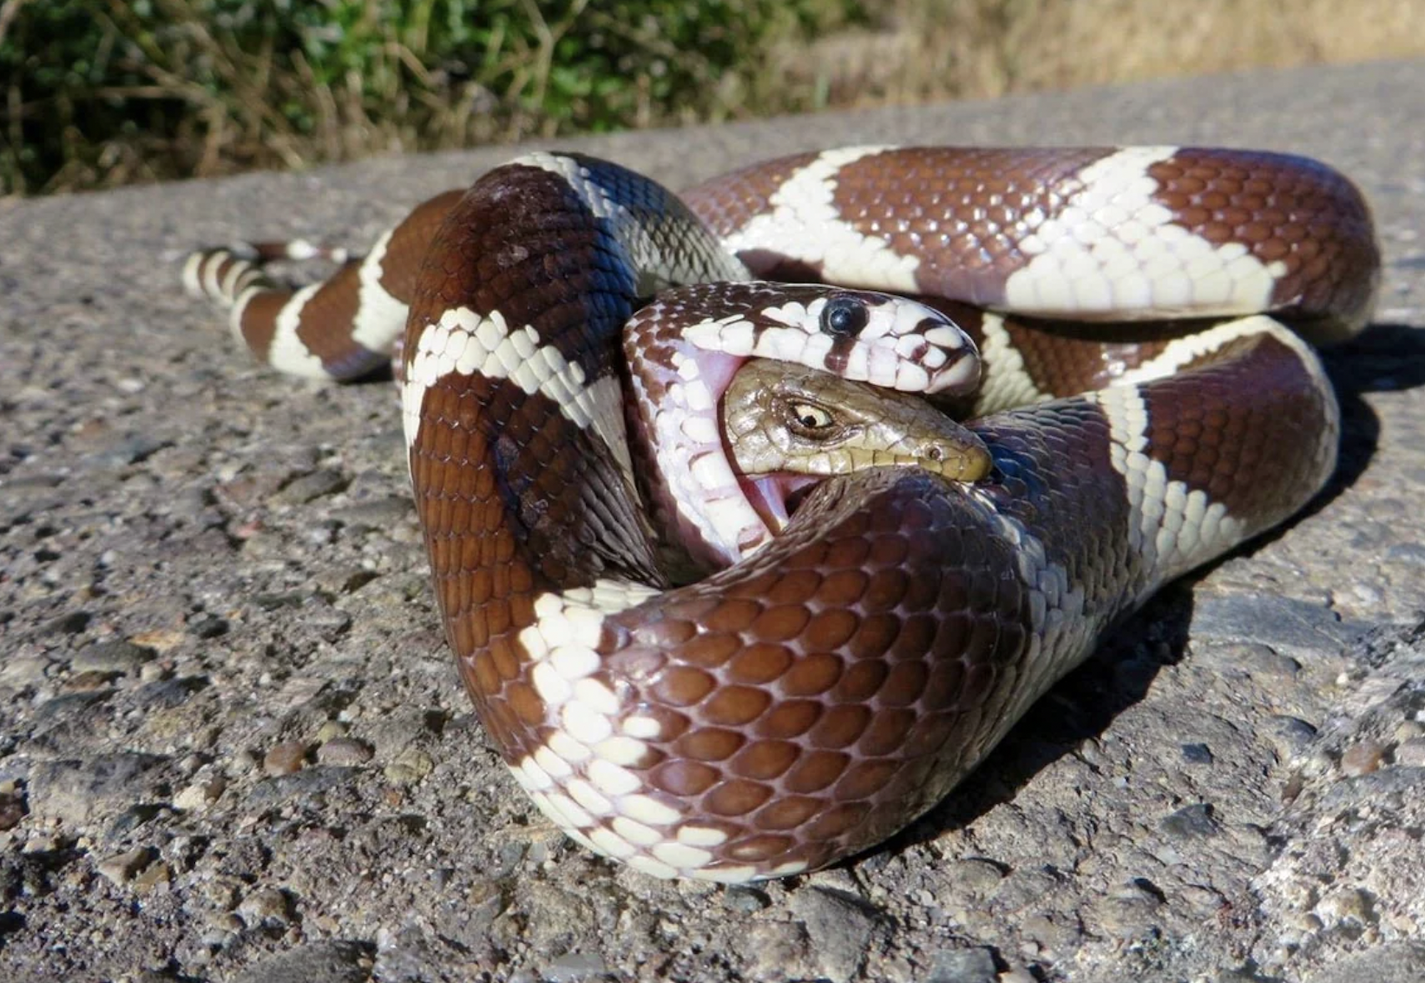 An alligator lizard fighting back from inside the belly of a king snake.